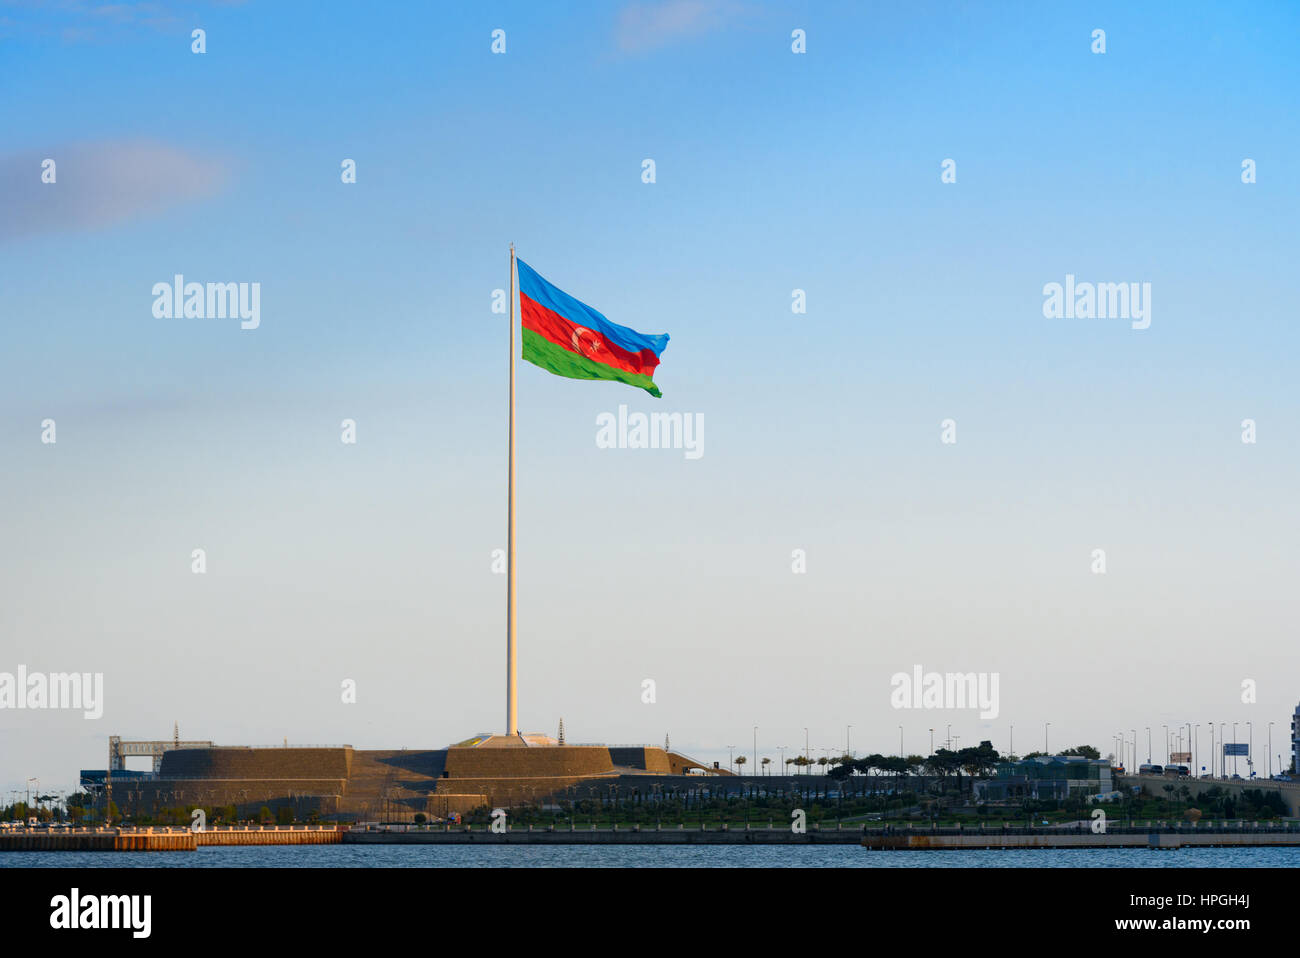 View of National Flag Square in Baku. Azerbaijan. Flag measuring 70 by 35 metres flies on pole 162 m high Stock Photo